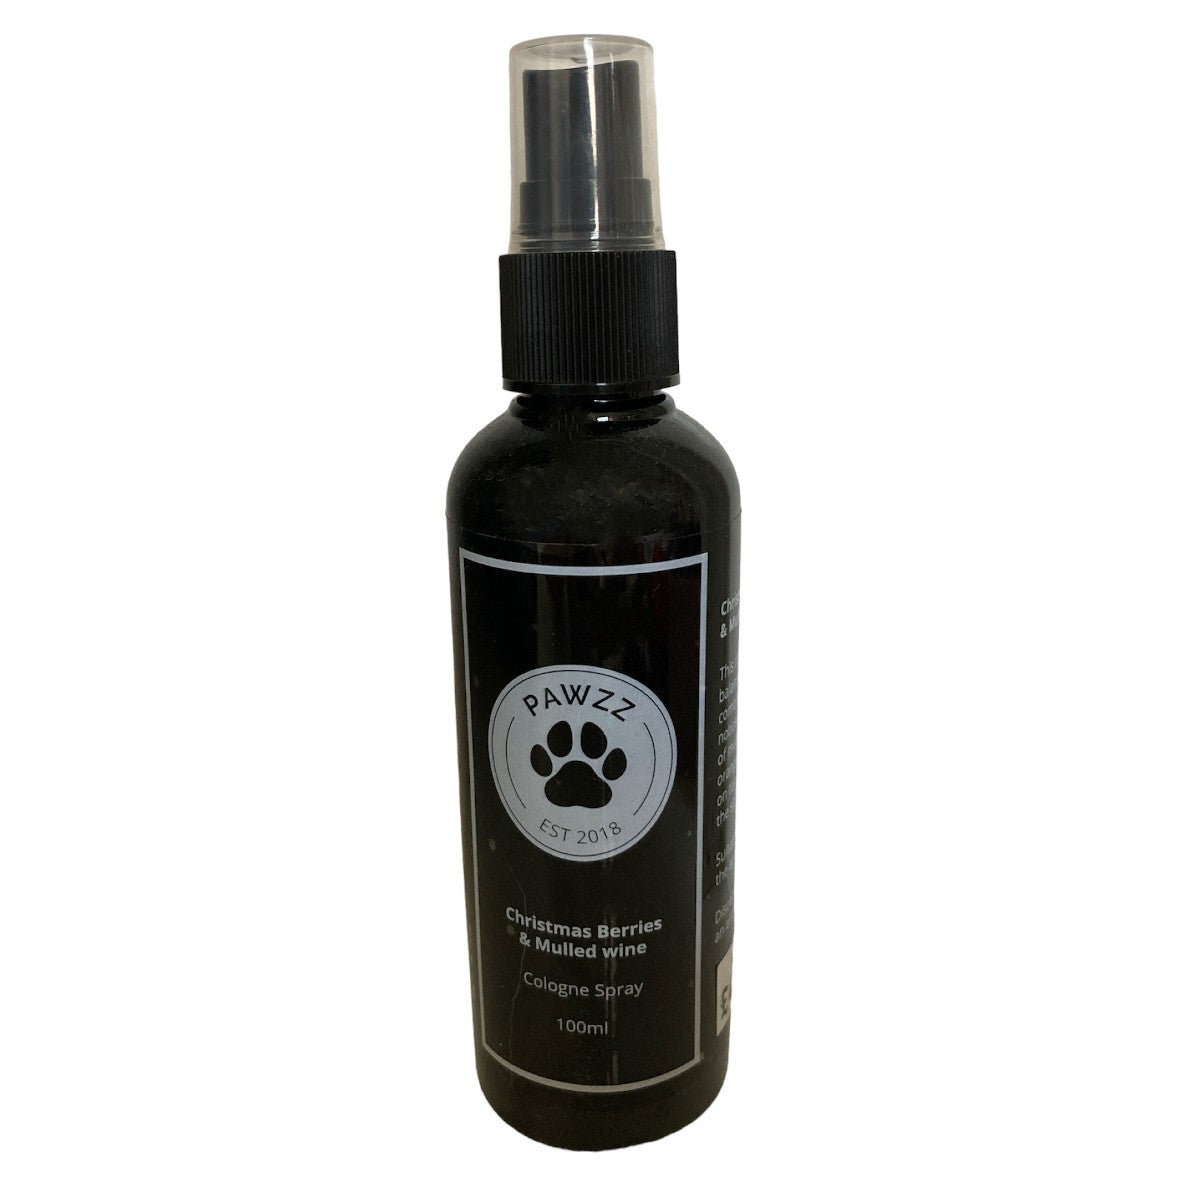 Pawzz Christmas Berries & Mulled Wine Fragrance